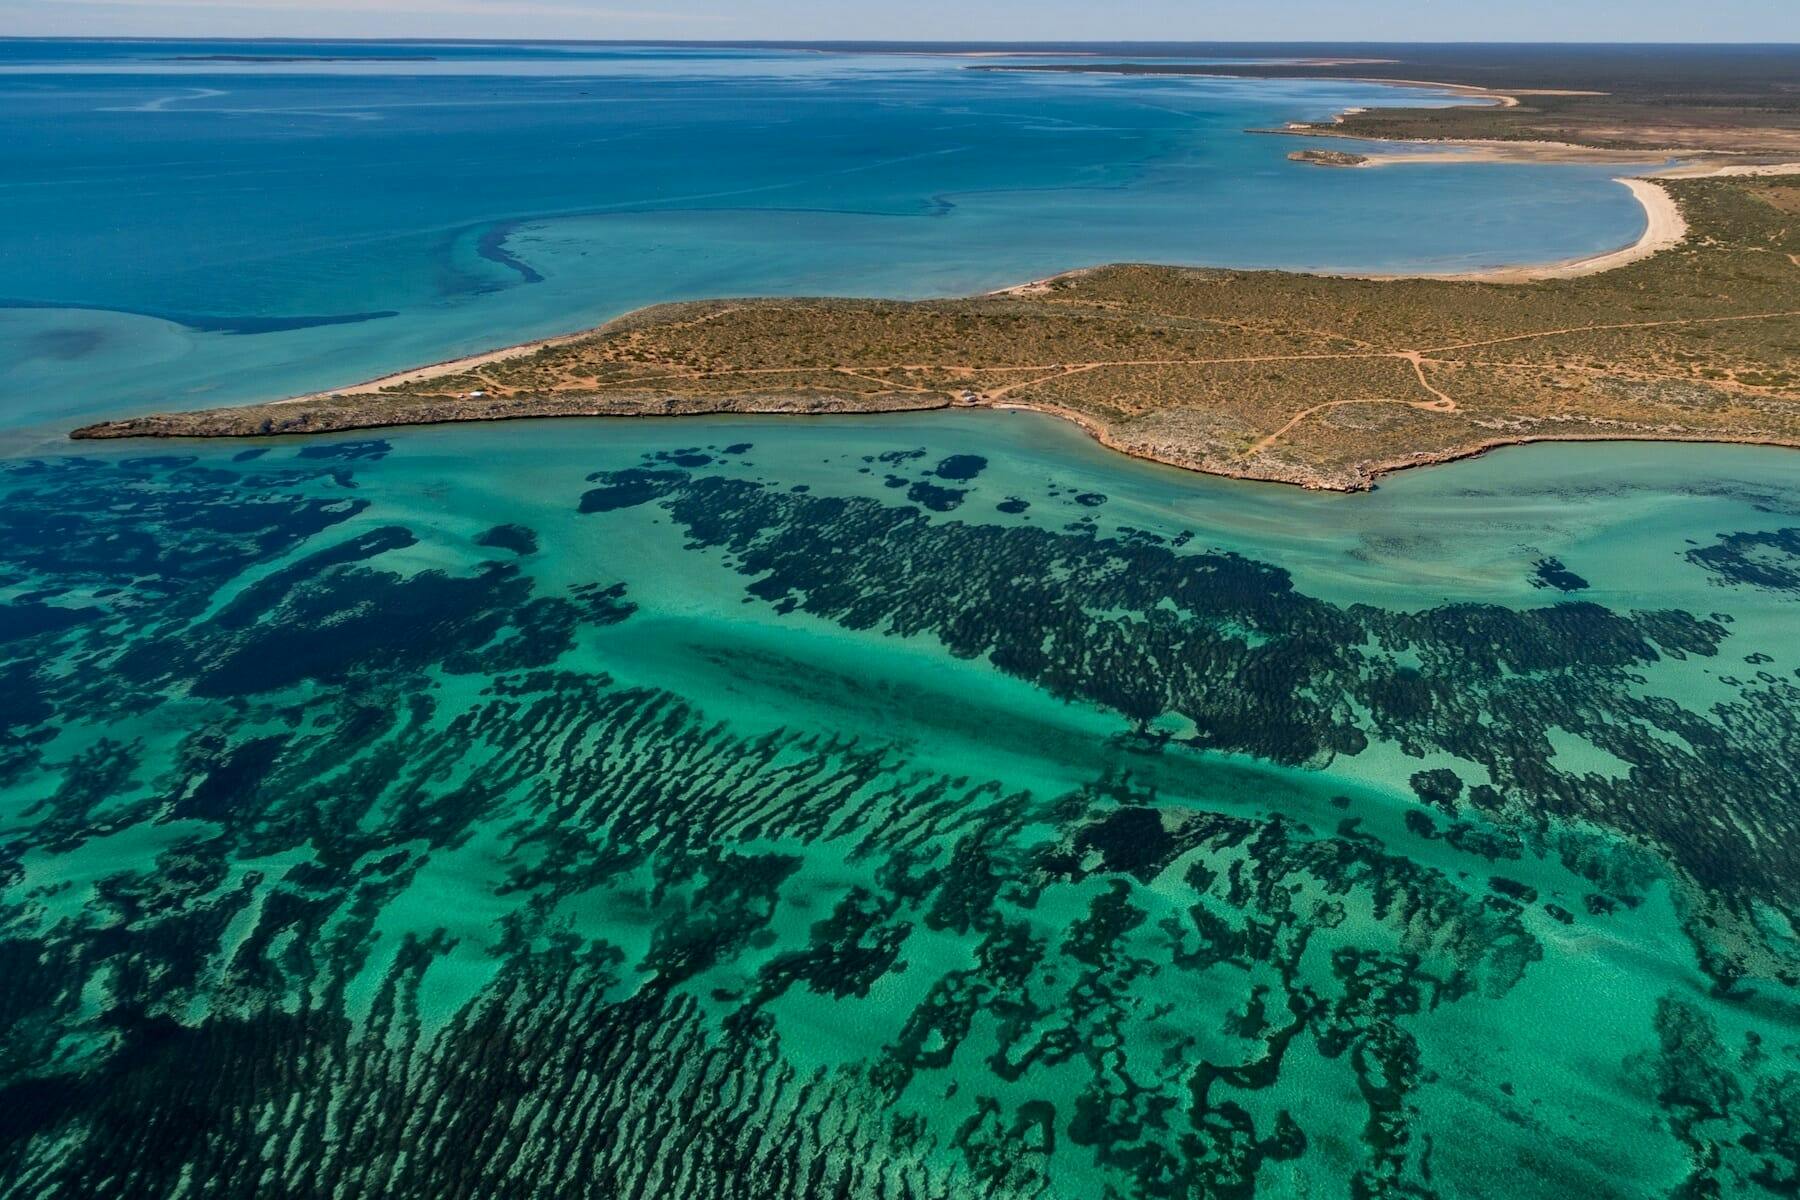 Shark Bay's vast sea grass fields are the largest plant on earth